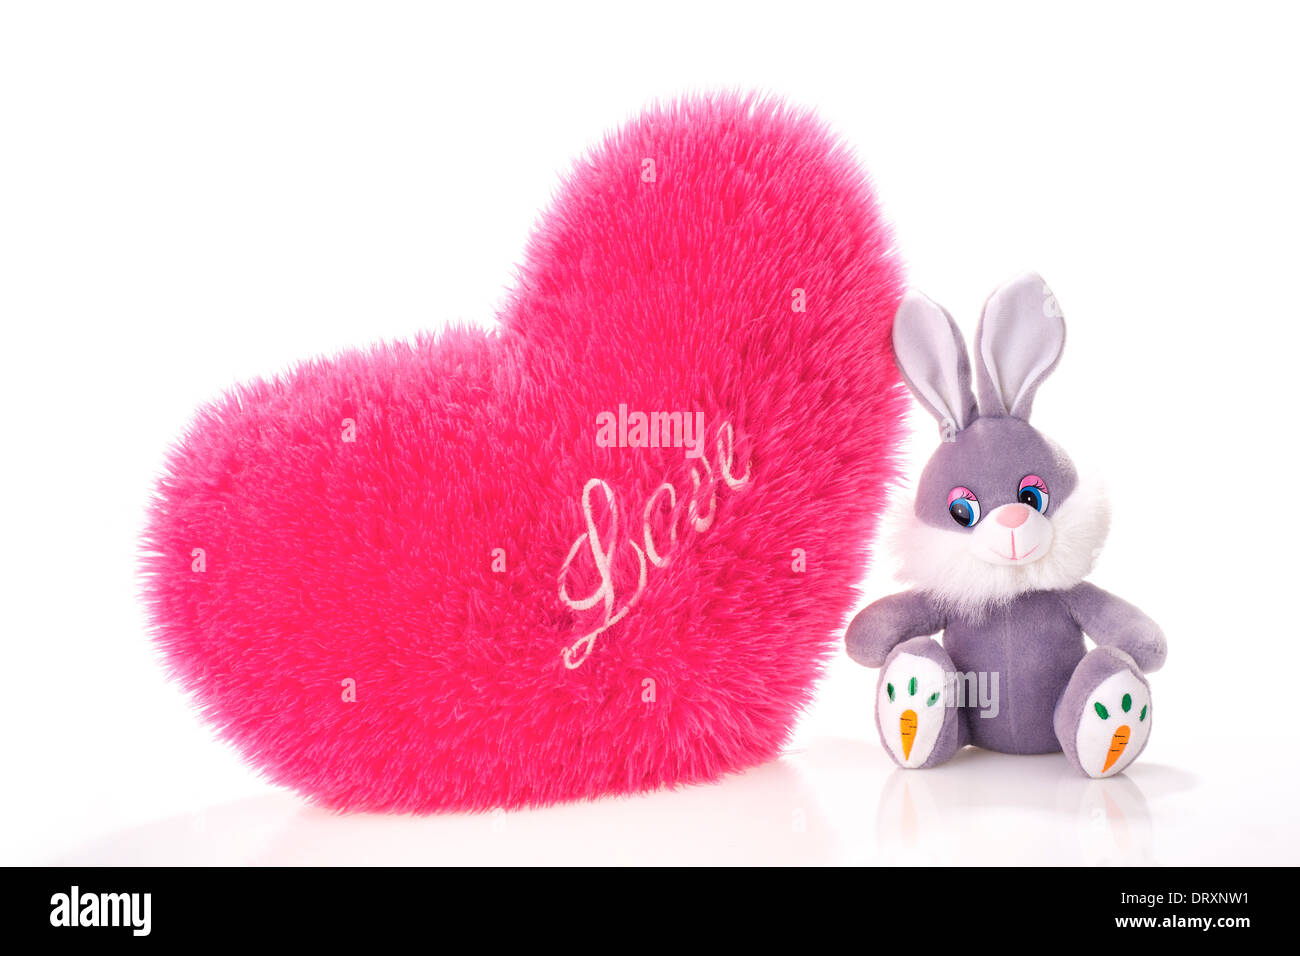 Toy hare and heart-shaped pillow isolated on white Stock Photo